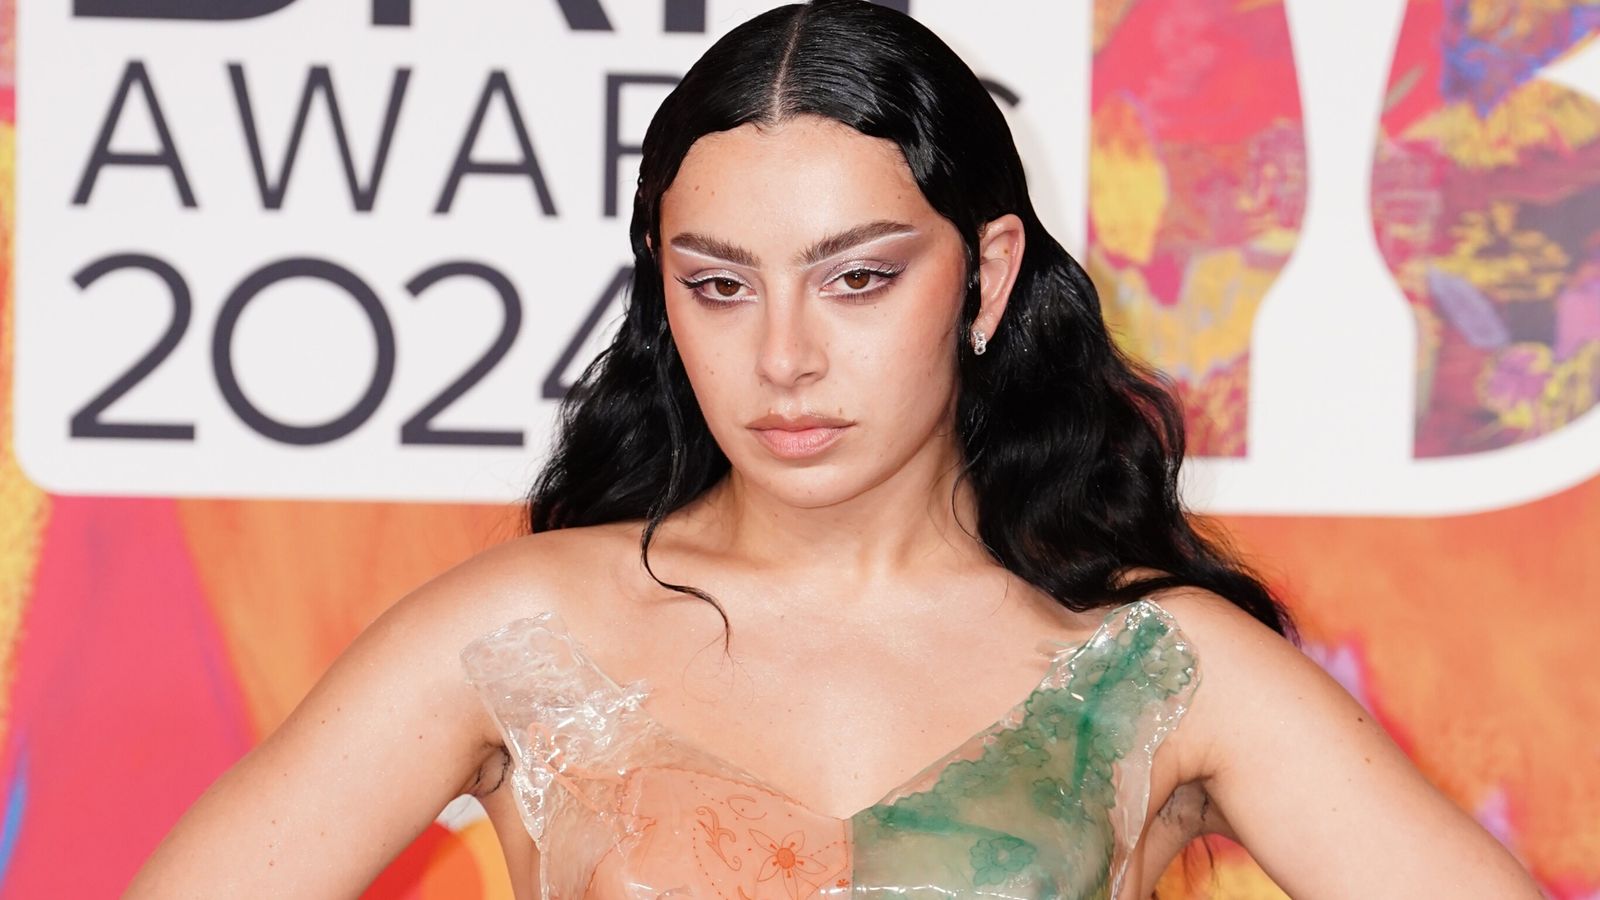 Charli XCX warns fans to stop chanting about Taylor Swift